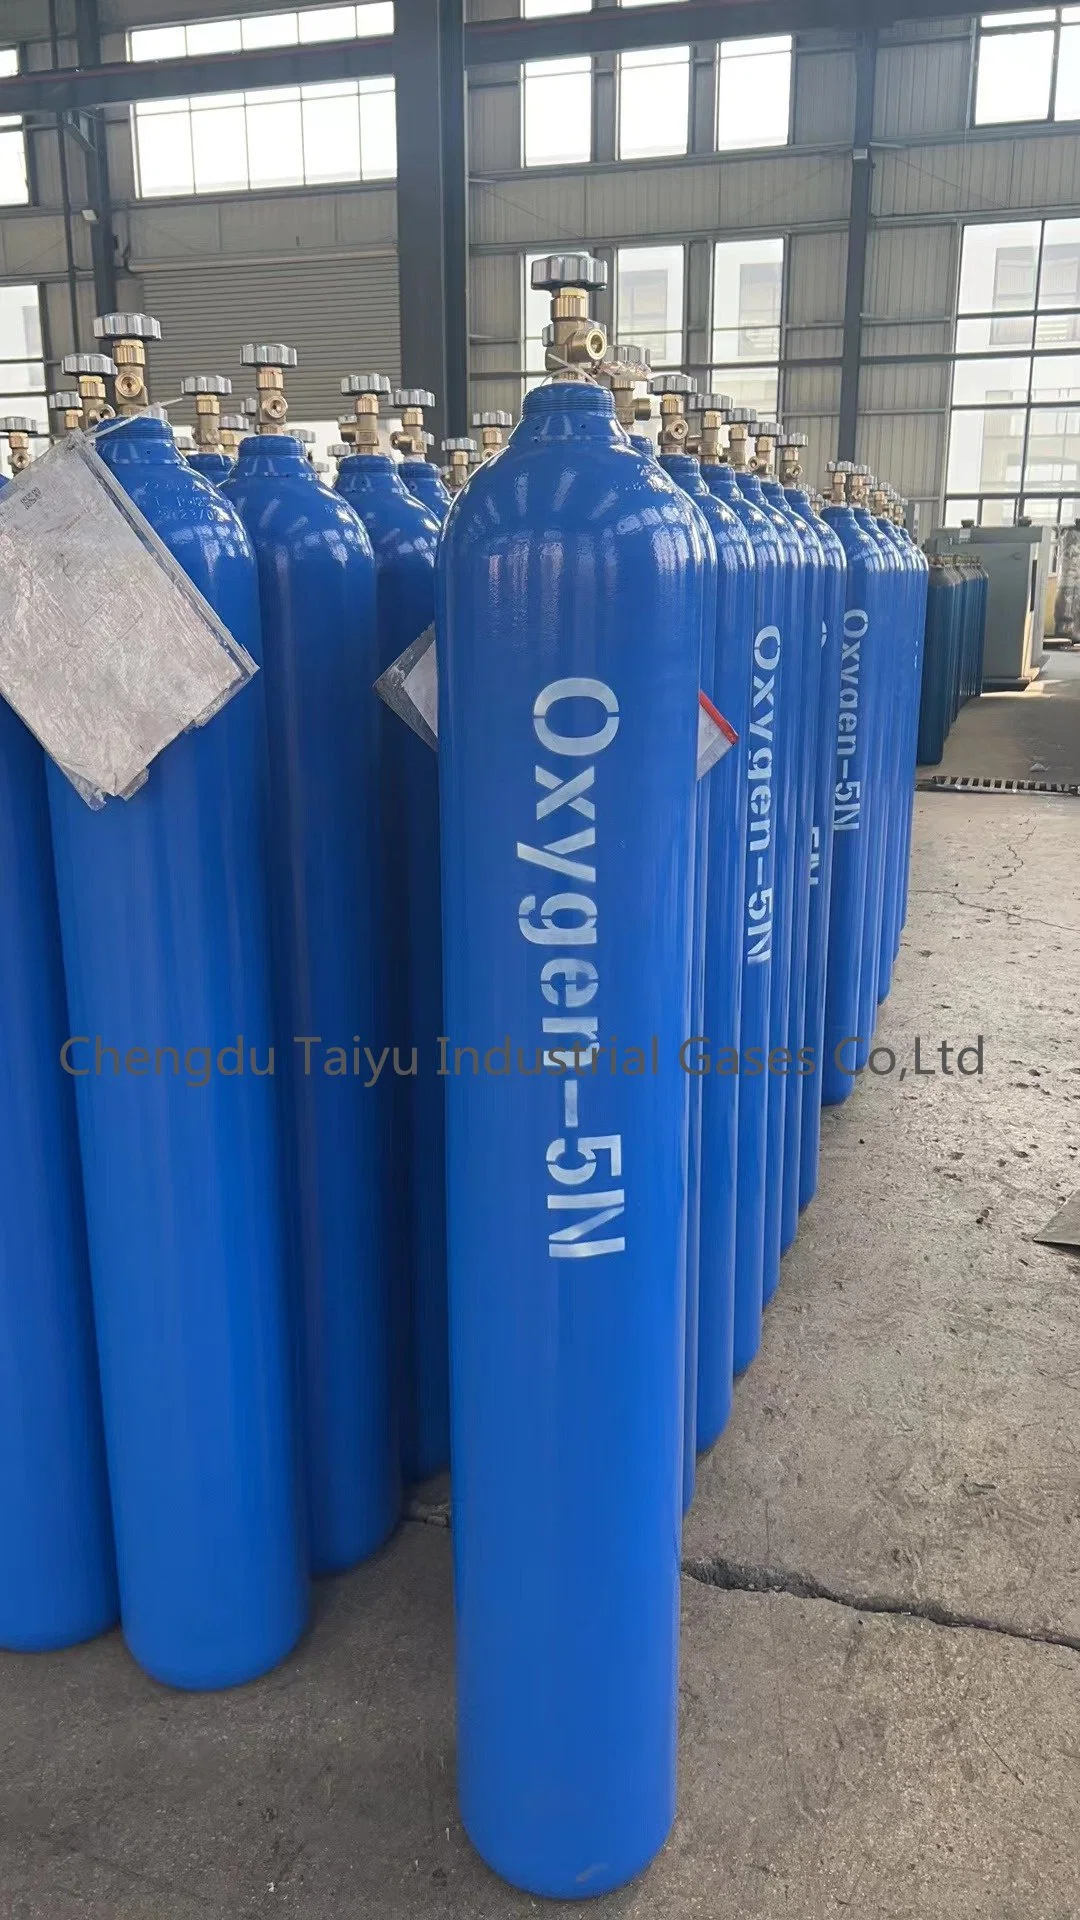 Original Factory Supply 99.999% 99.9999% High Purity Liquid Oxygen Gas for Sale